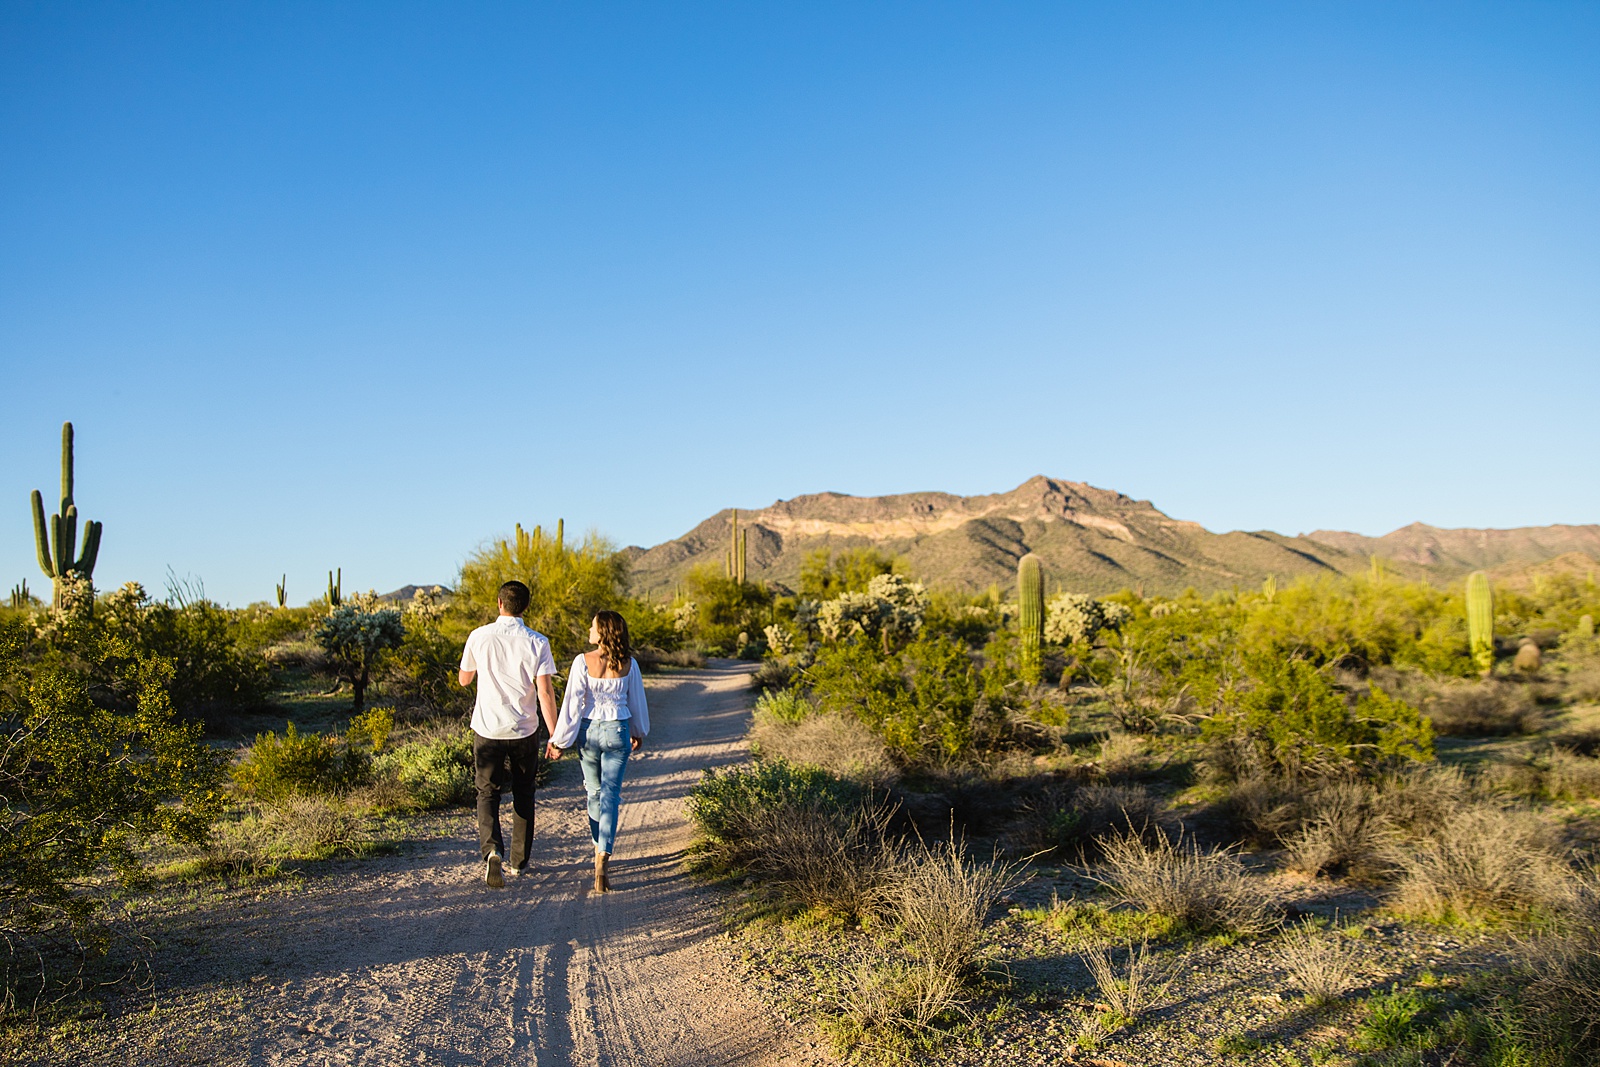 Couple walking together during their Phoenix engagement session by Arizona engagement photographer PMA Photography.